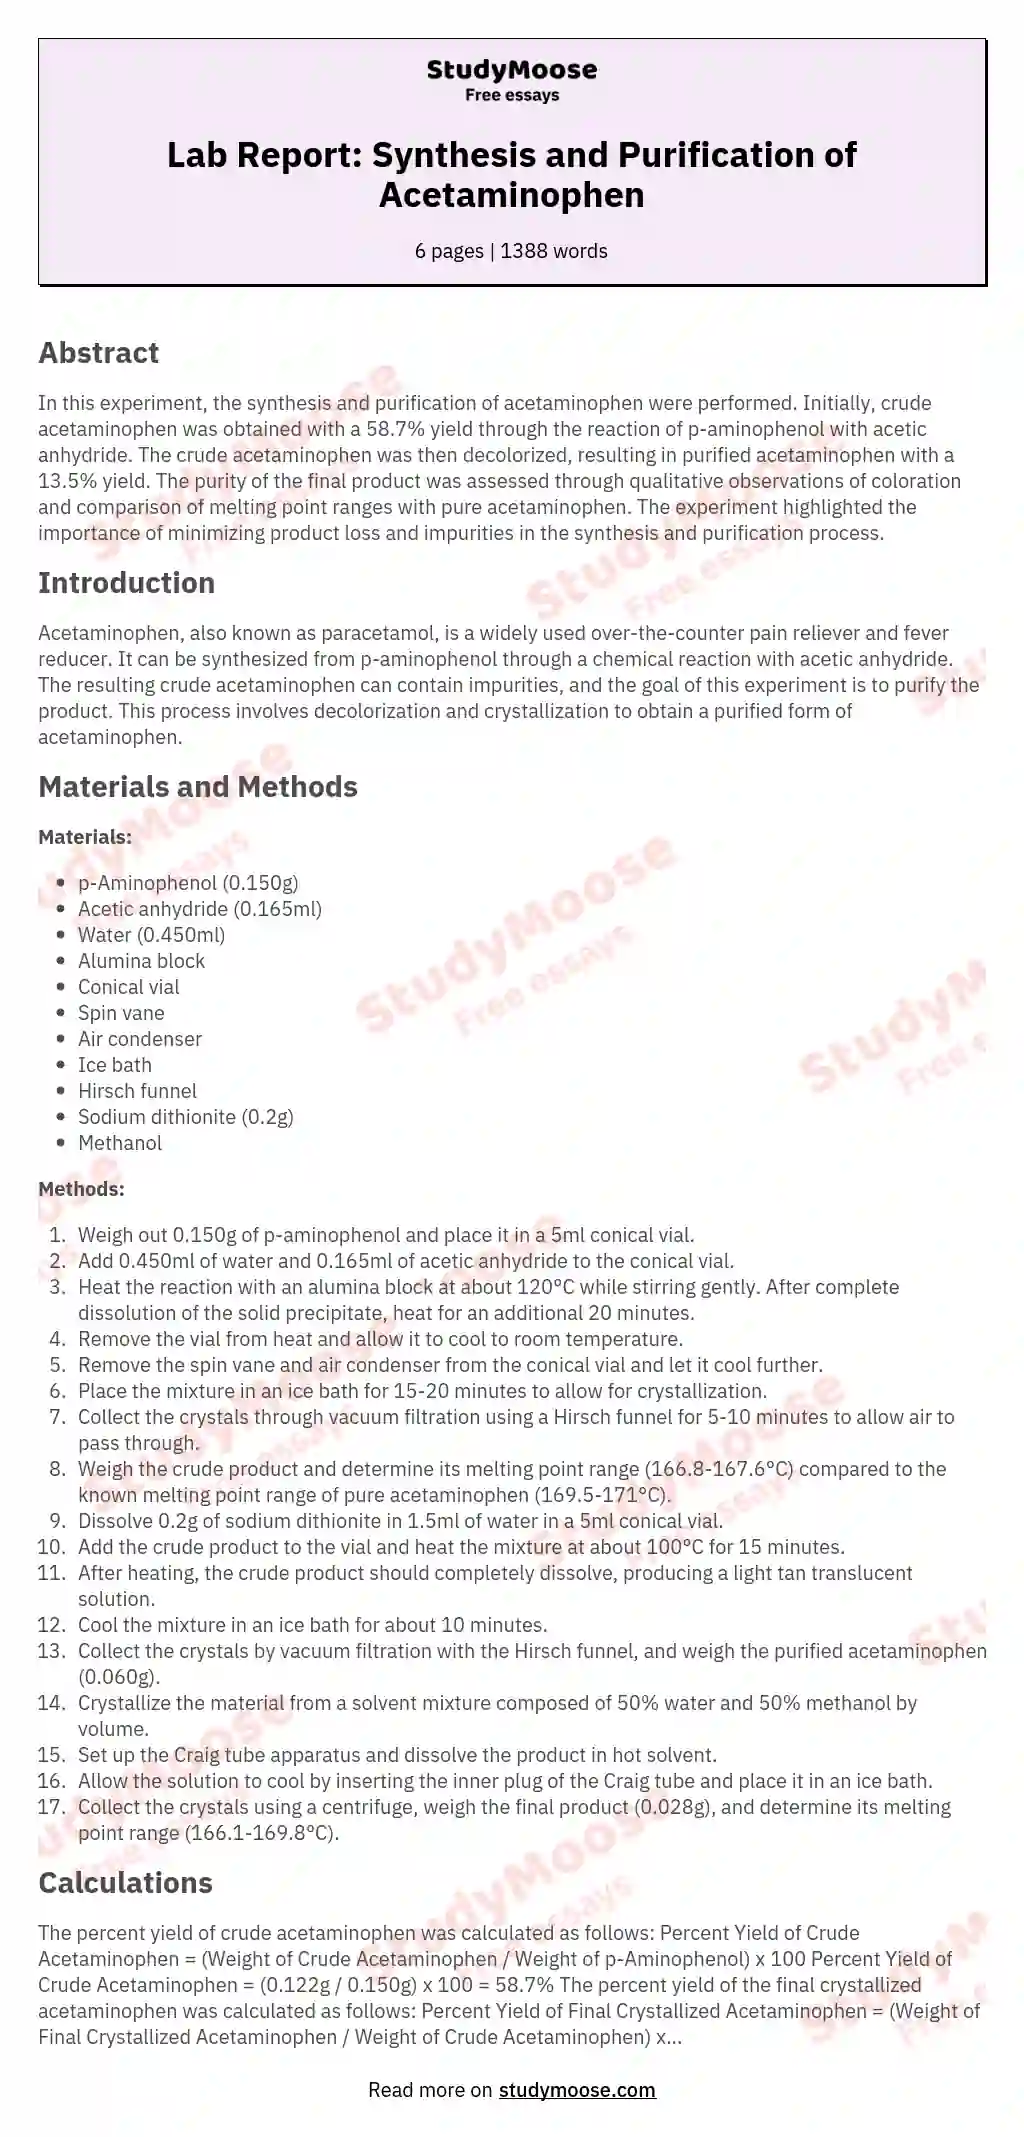 Lab Report: Synthesis and Purification of Acetaminophen essay